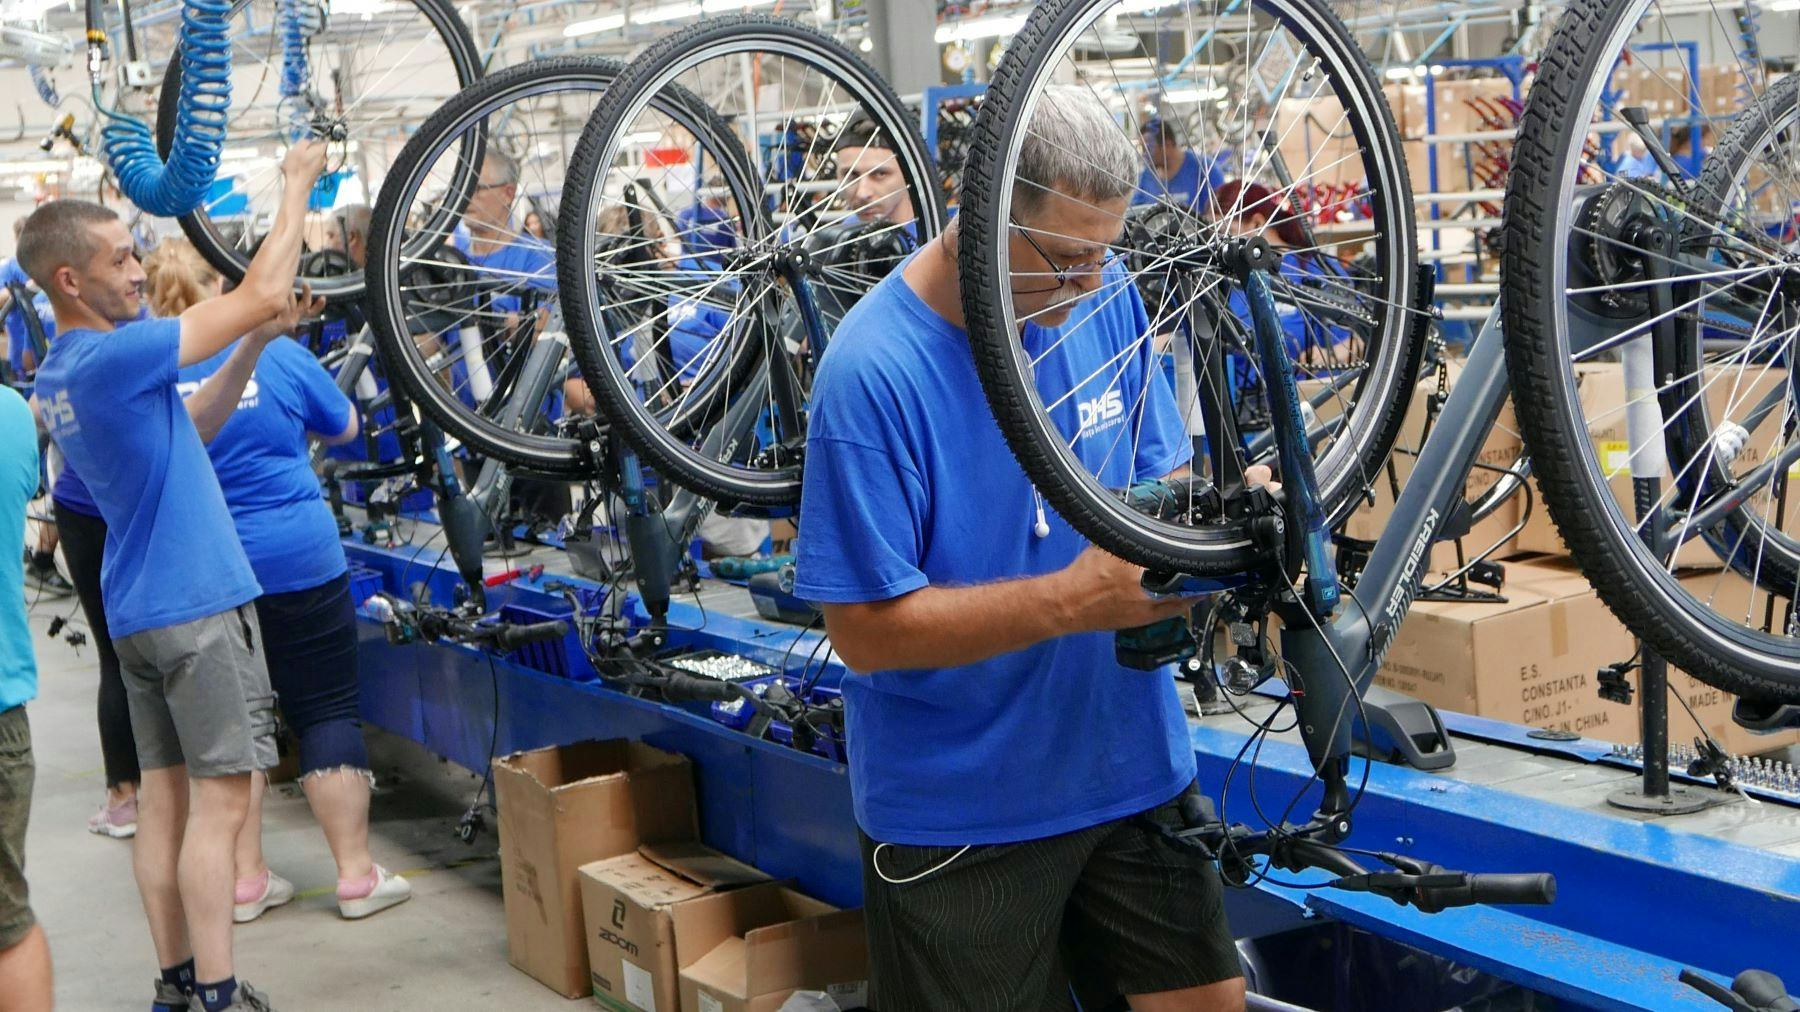 The bicycle industry is one of the bright spots for Romania with many international companies locating there. - Photo Jo Beckendorff